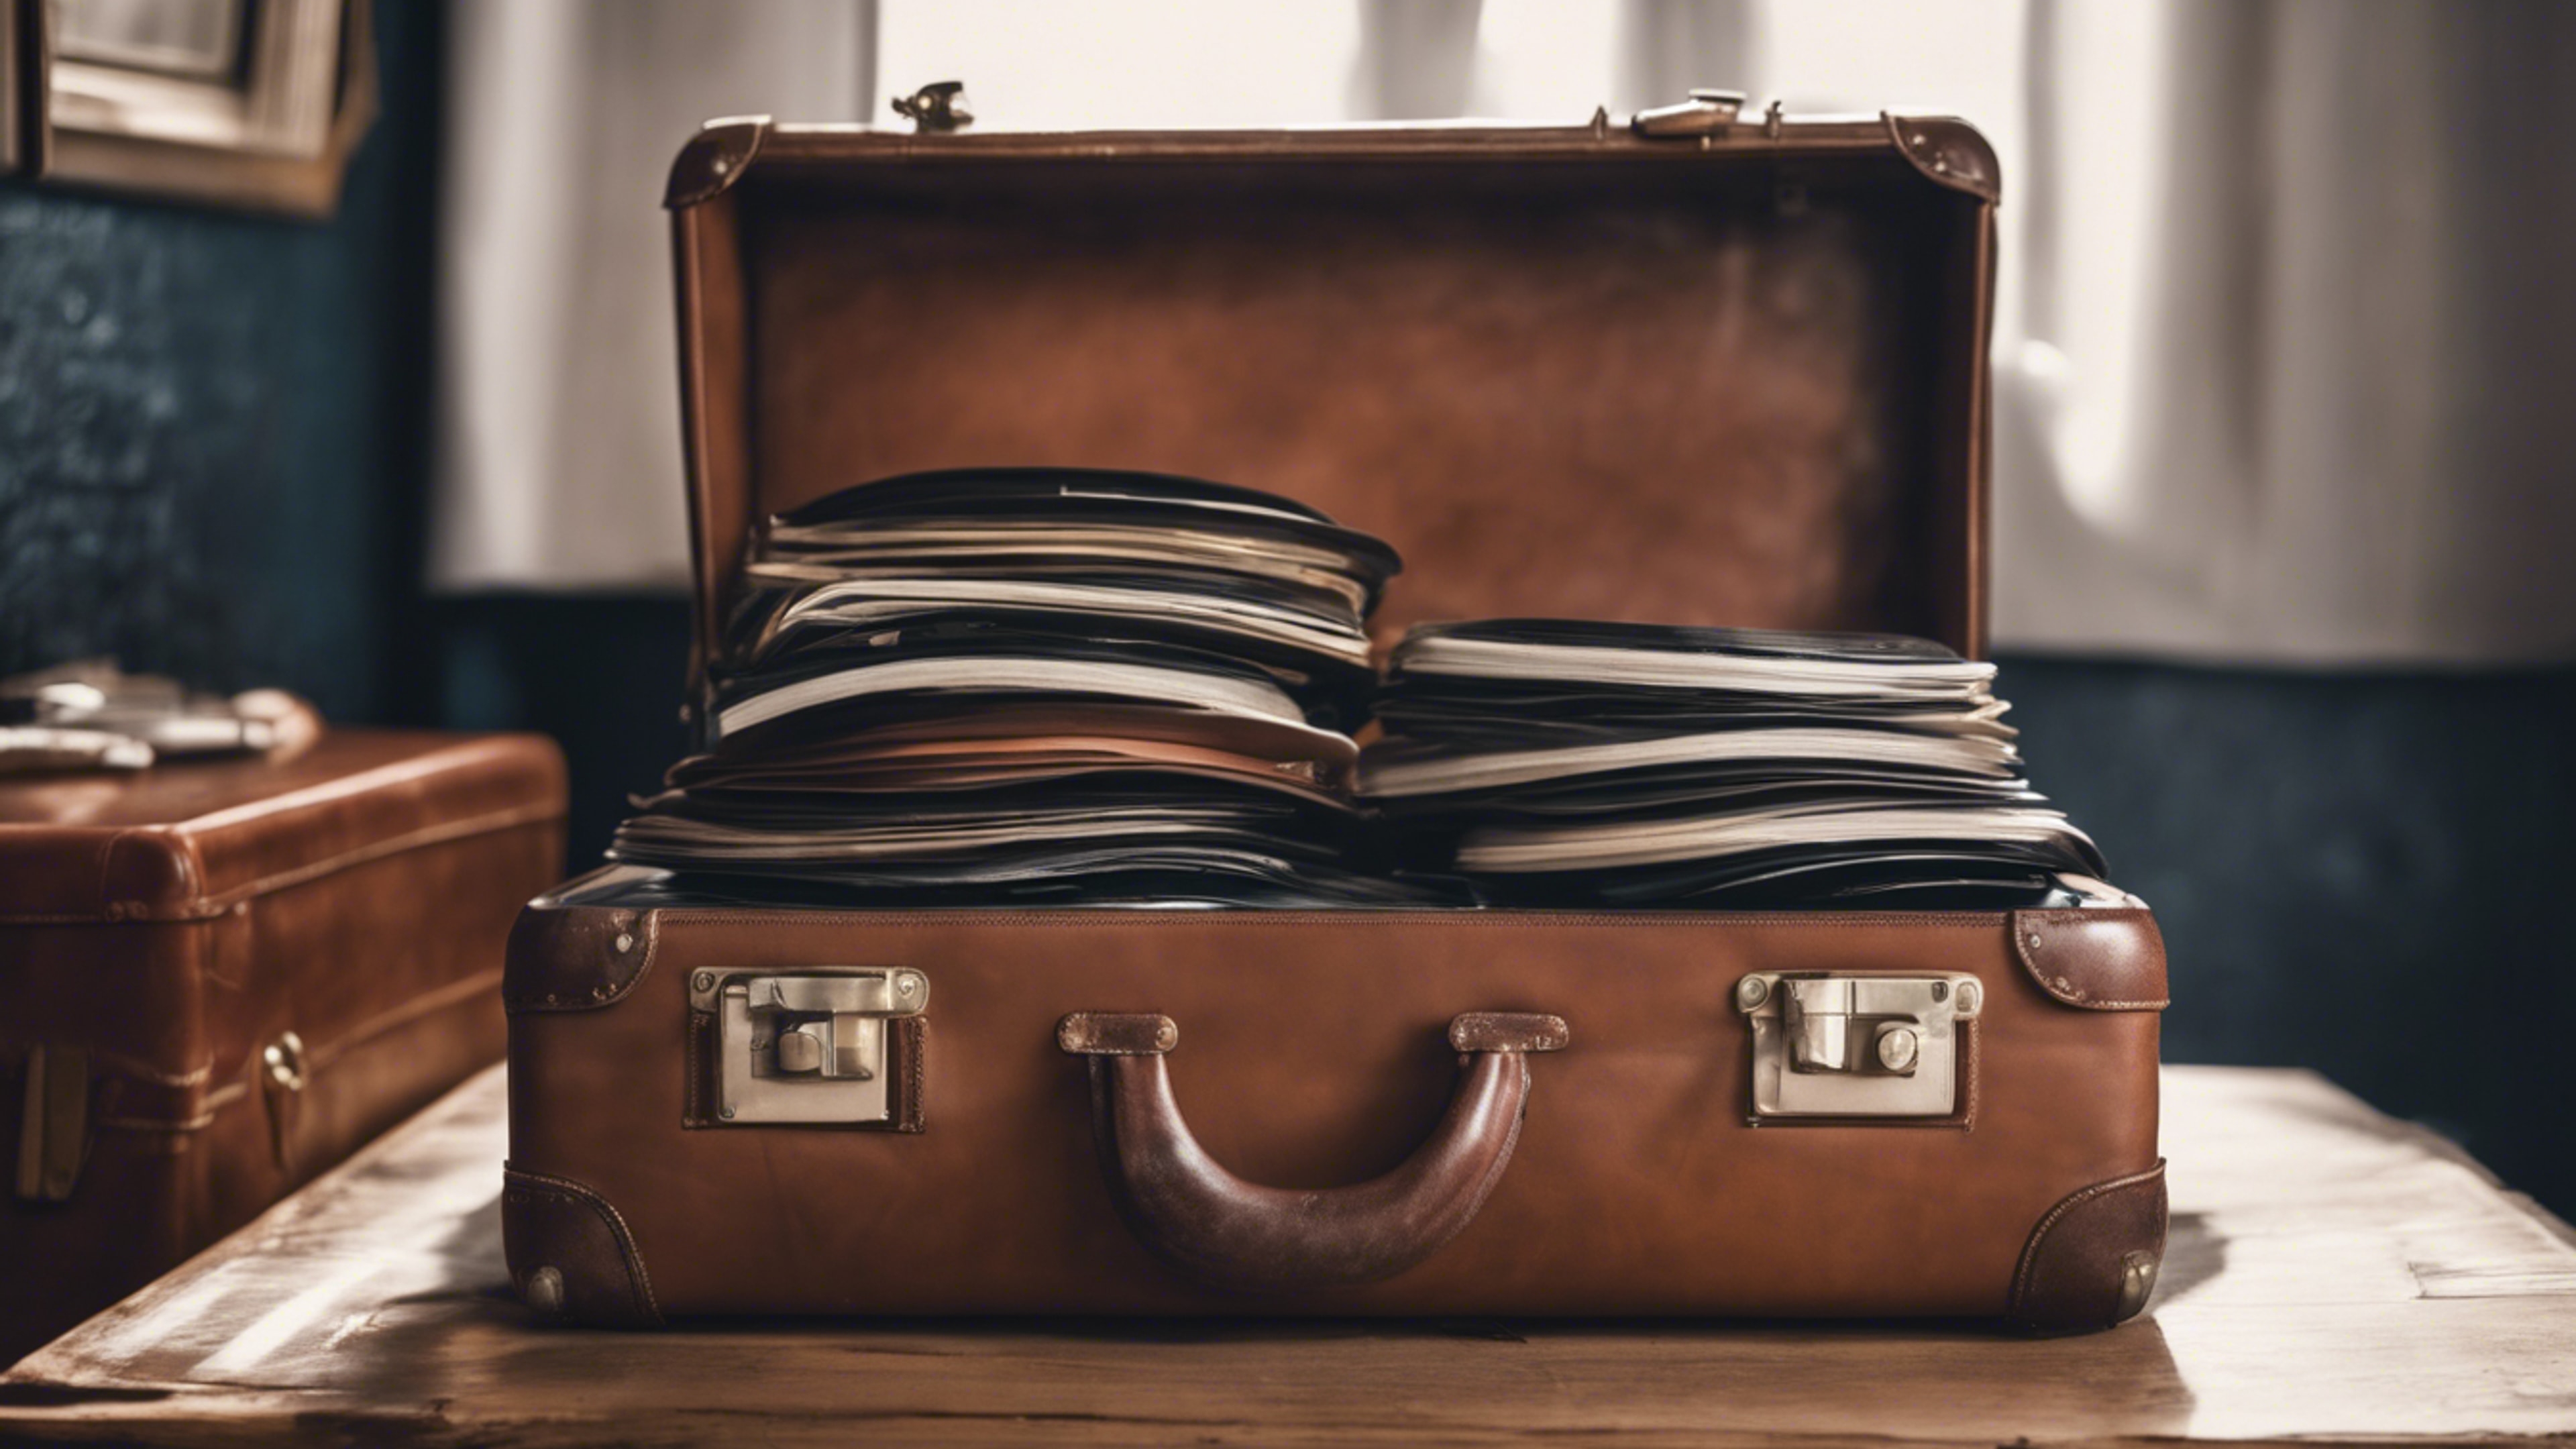 A vintage brown leather suitcase overflowing with vinyl records.壁紙[4a66a69191fd4d4591a7]